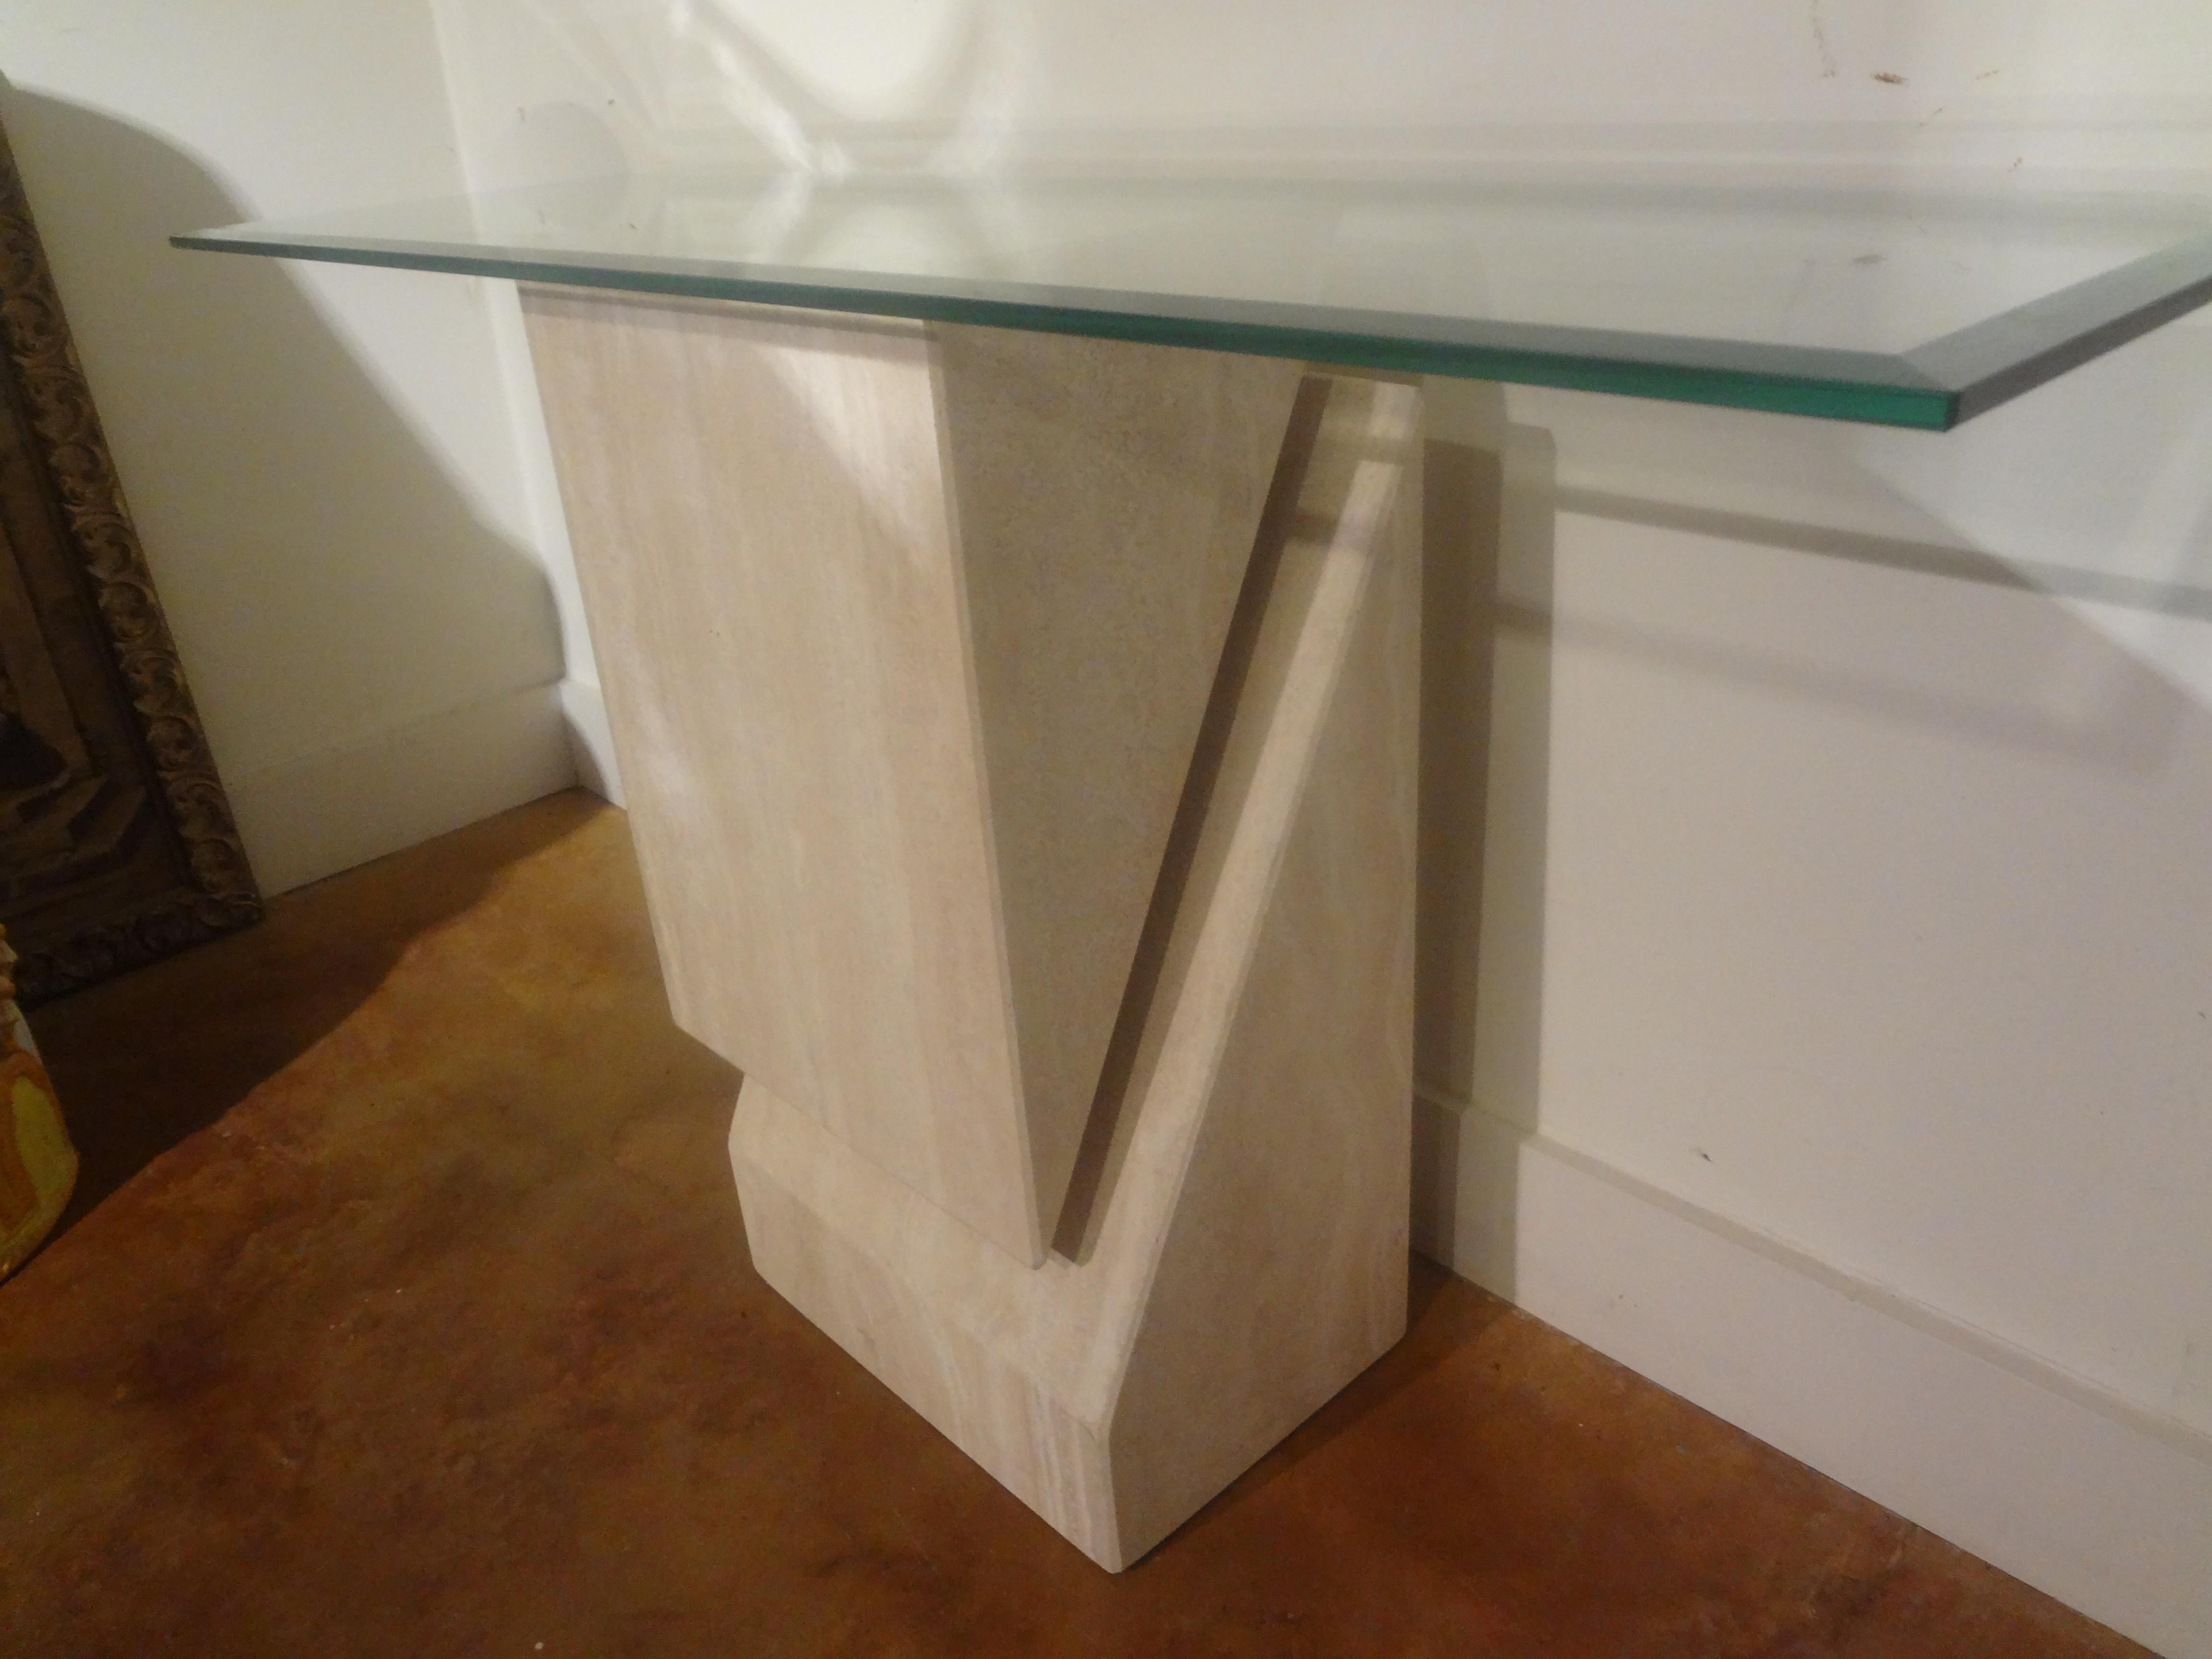 Italian Modernist Travertine Console Attributed To Angelo Mangiarotti.
This stunning Italian Postmodern honed travertine console table is beautifully designed with a beveled glass top. This versatile table that can be used in an entrance hall,